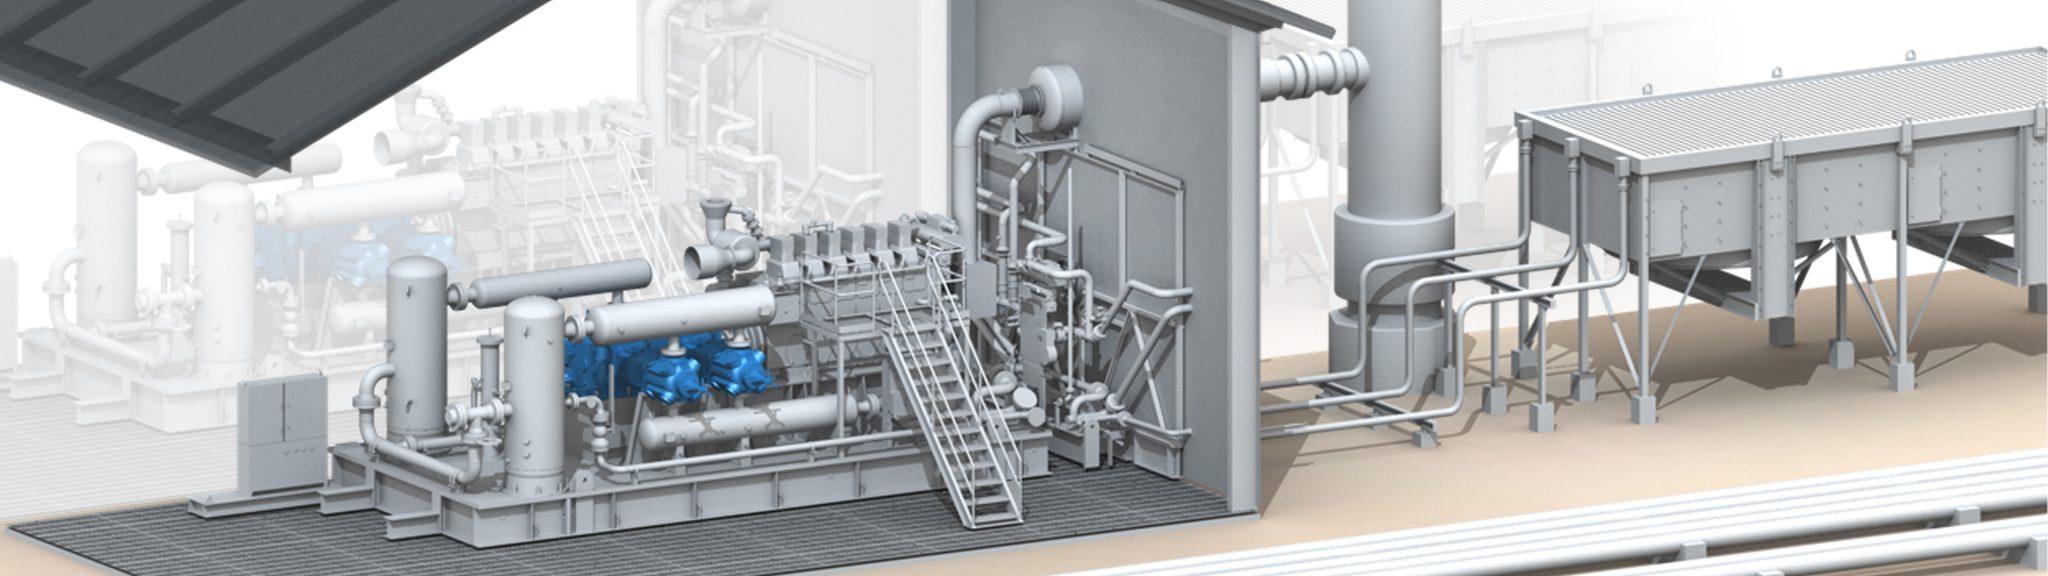 A rendering of a pipeline transmission unit where condensate is removed for further transmission down a pipeline